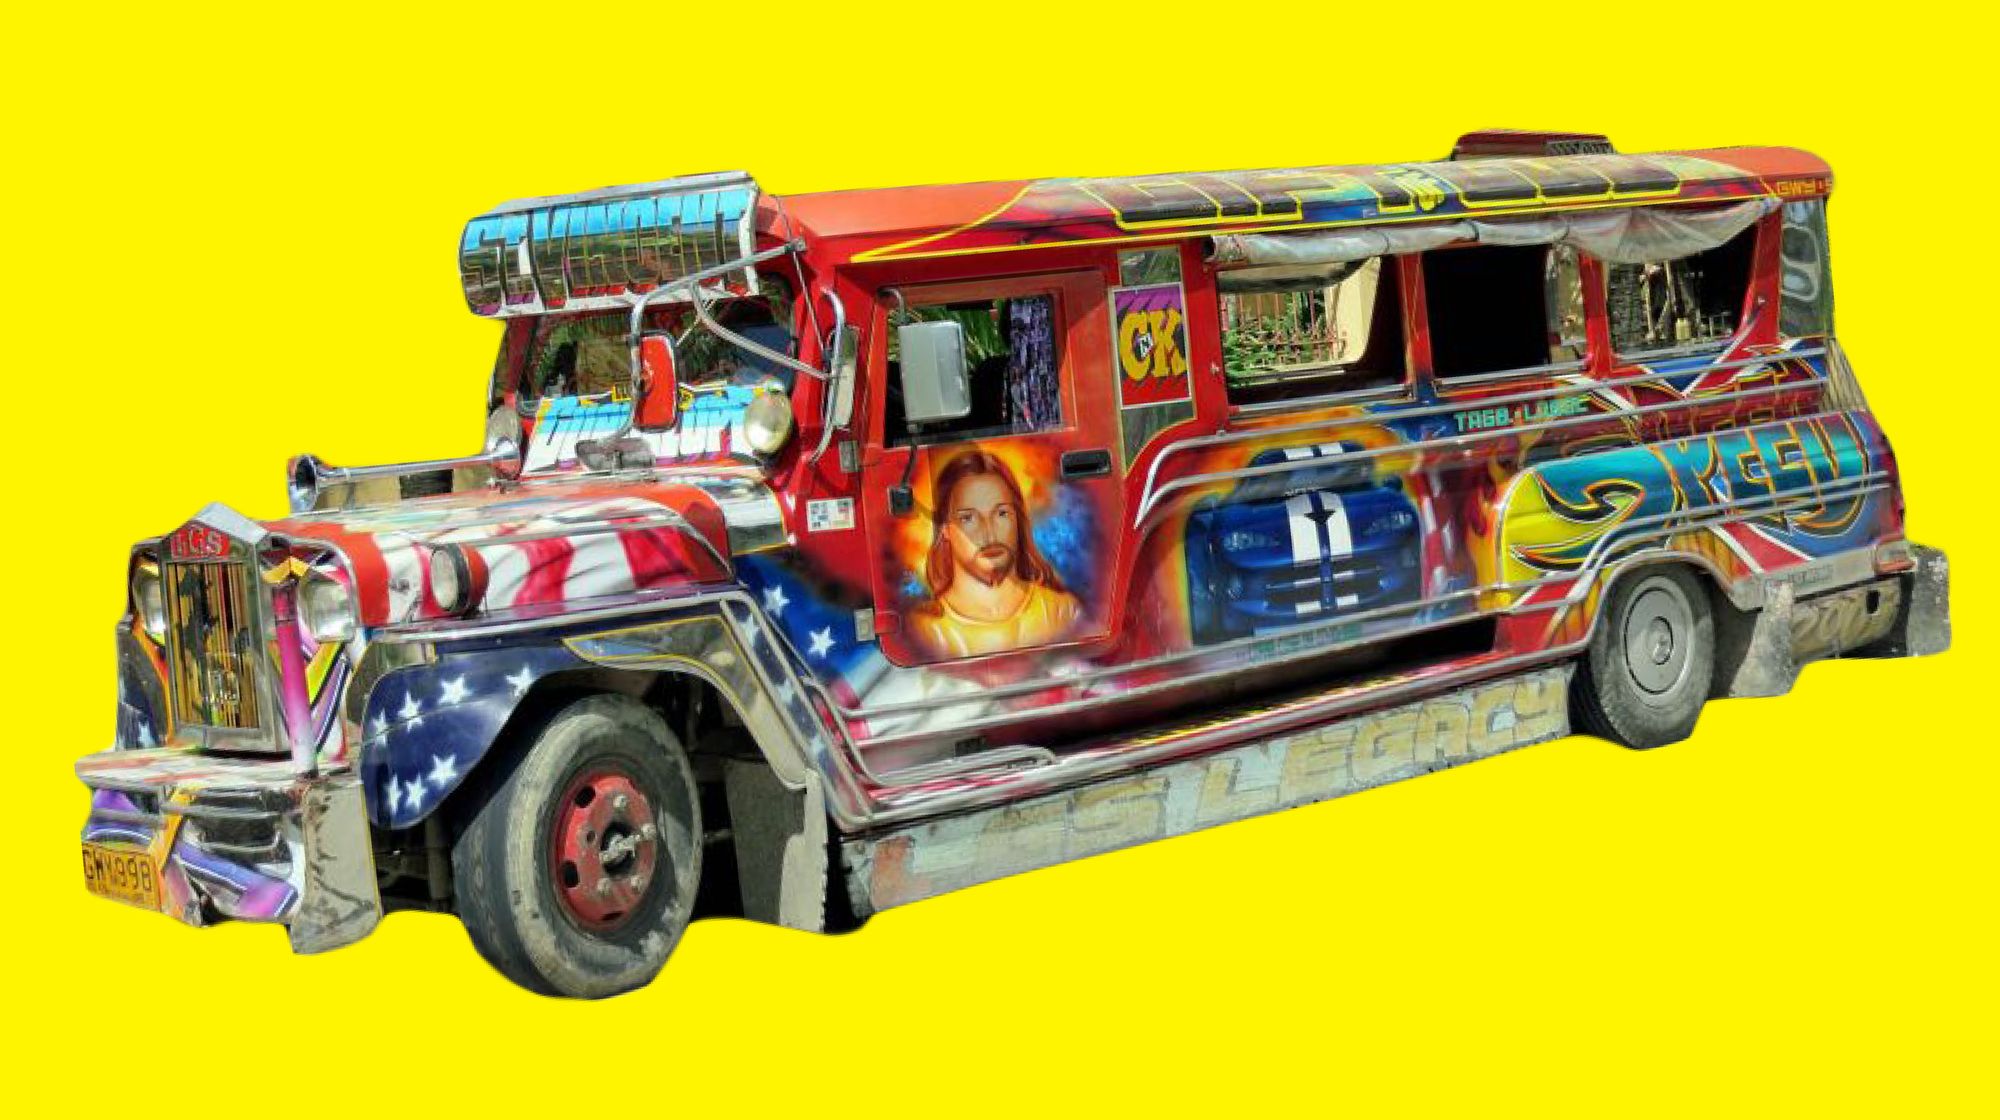 A heavily decorated Jeepney. It is colorfully spray-painted with images of a race-car, a portrait of Jesus, a U.S.A flag, and graffiti.